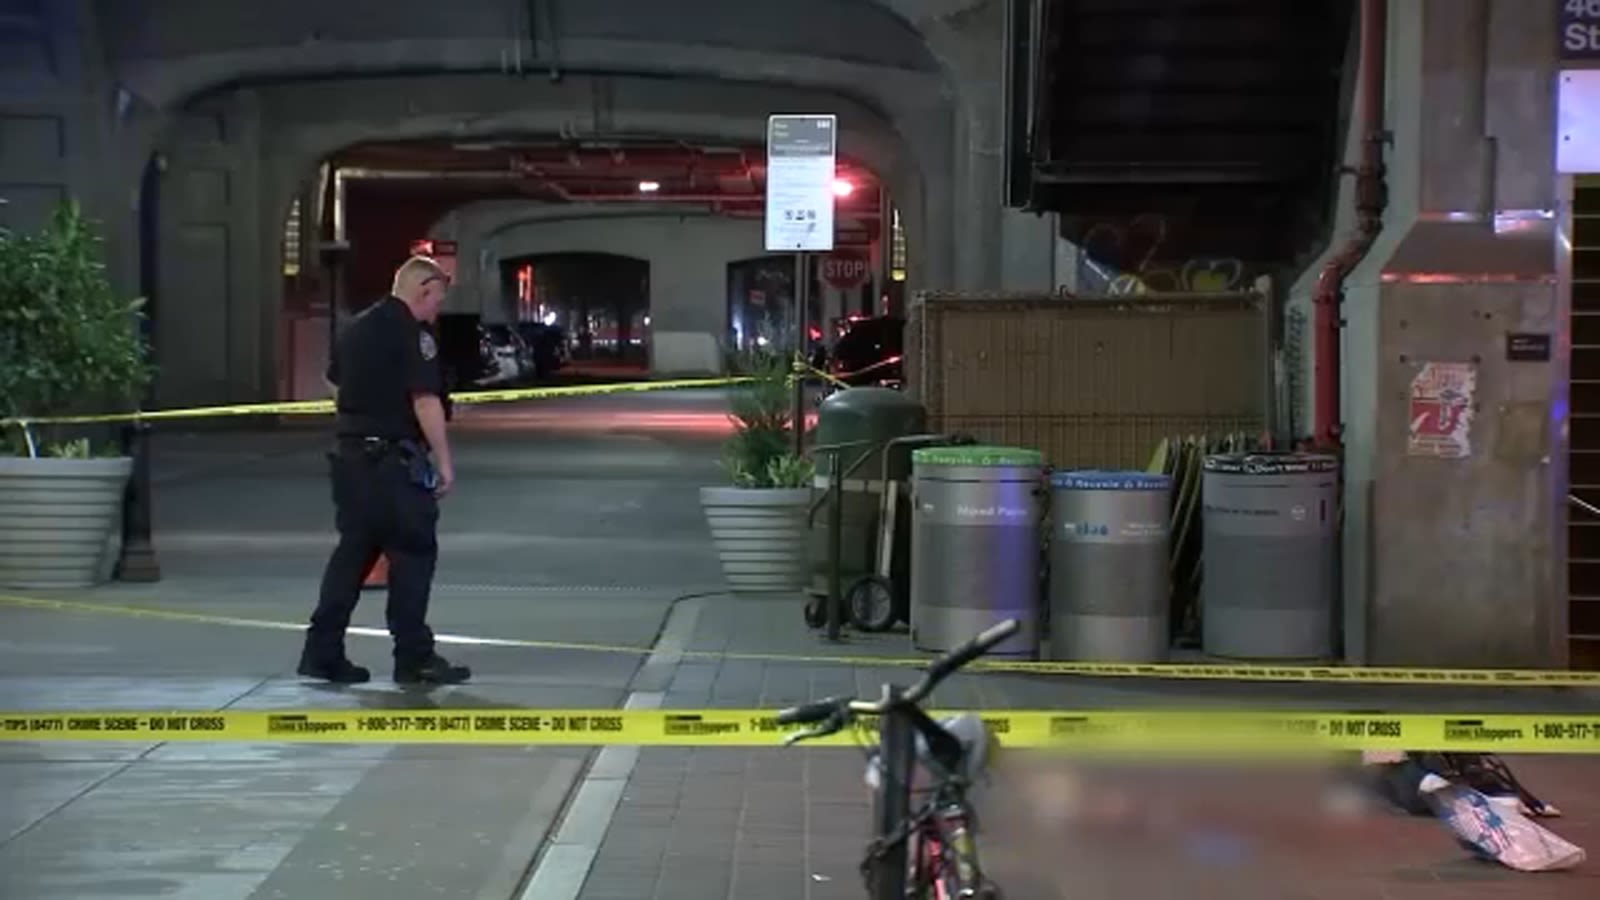 Teen girl dies after being stabbed in neck near Sunnyside subway station: police sources